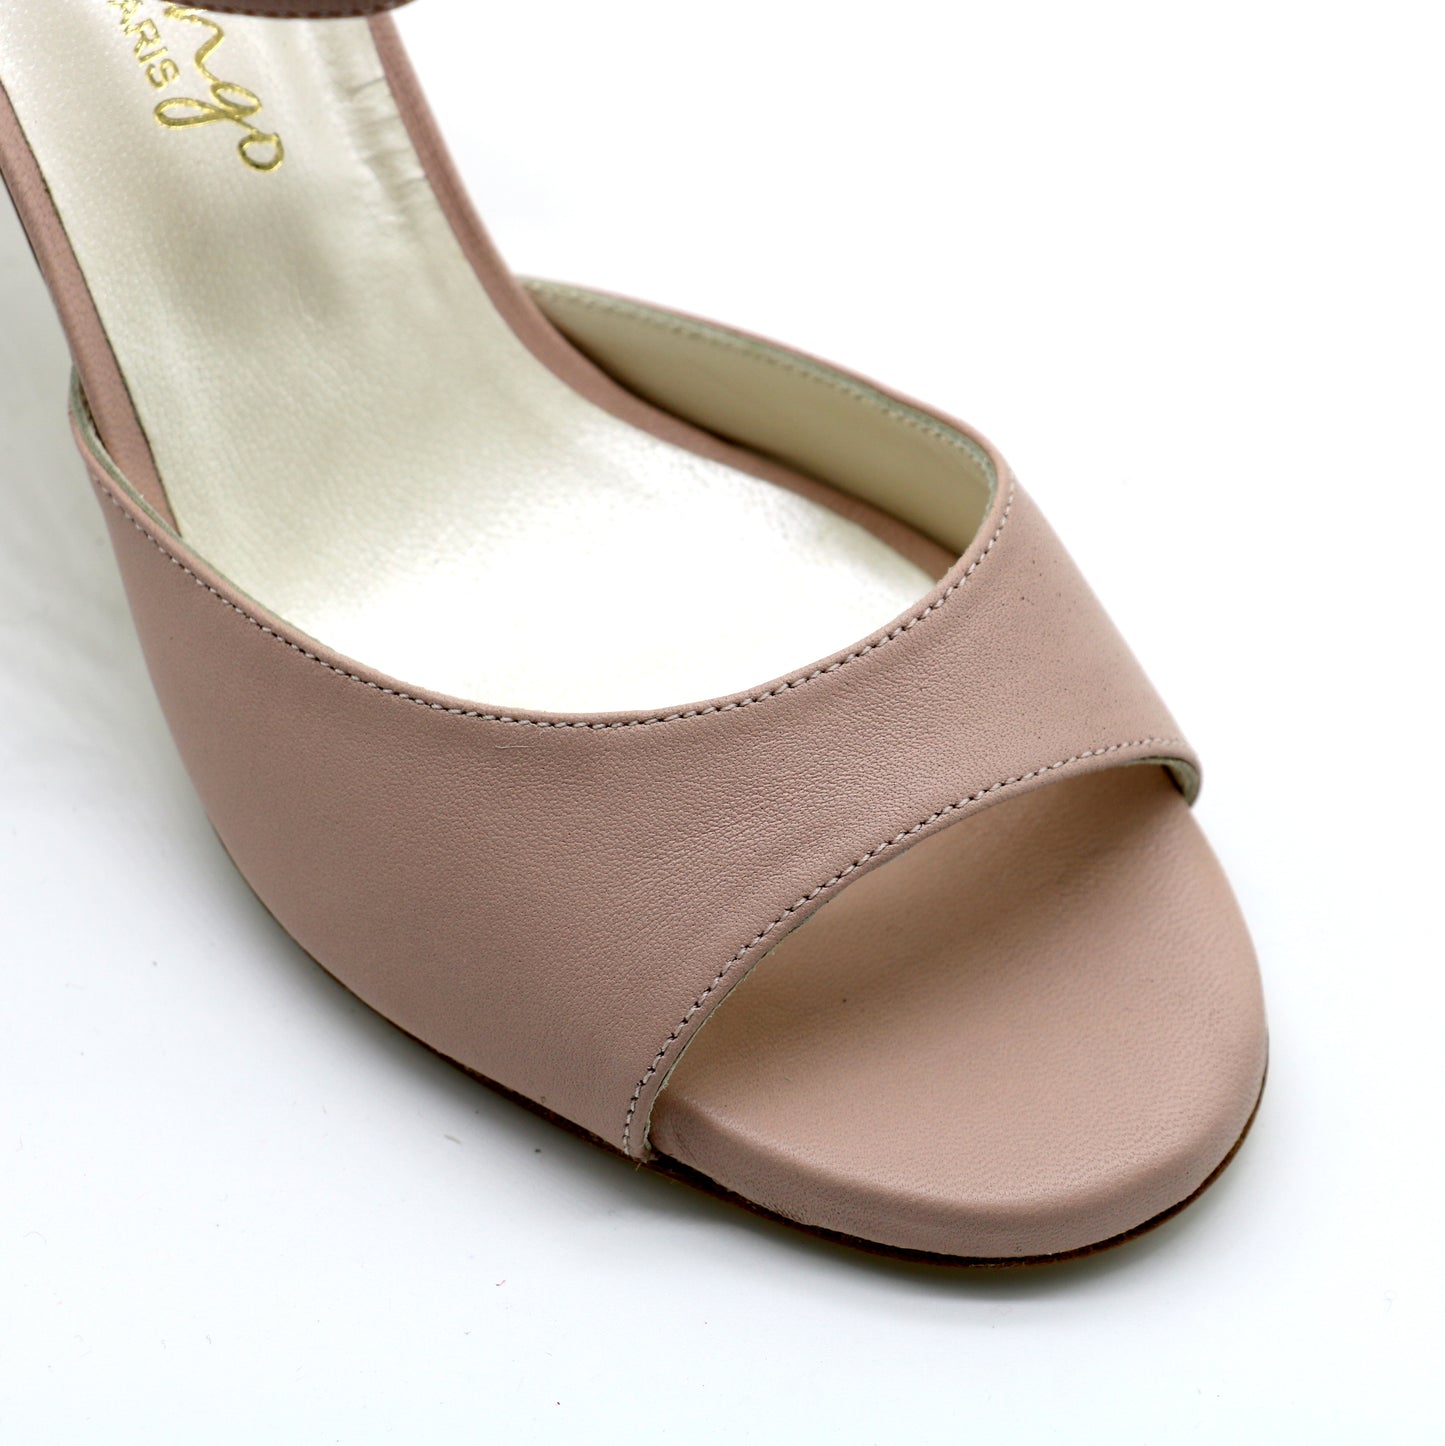 Uno Nude smooth leather heels 7cm